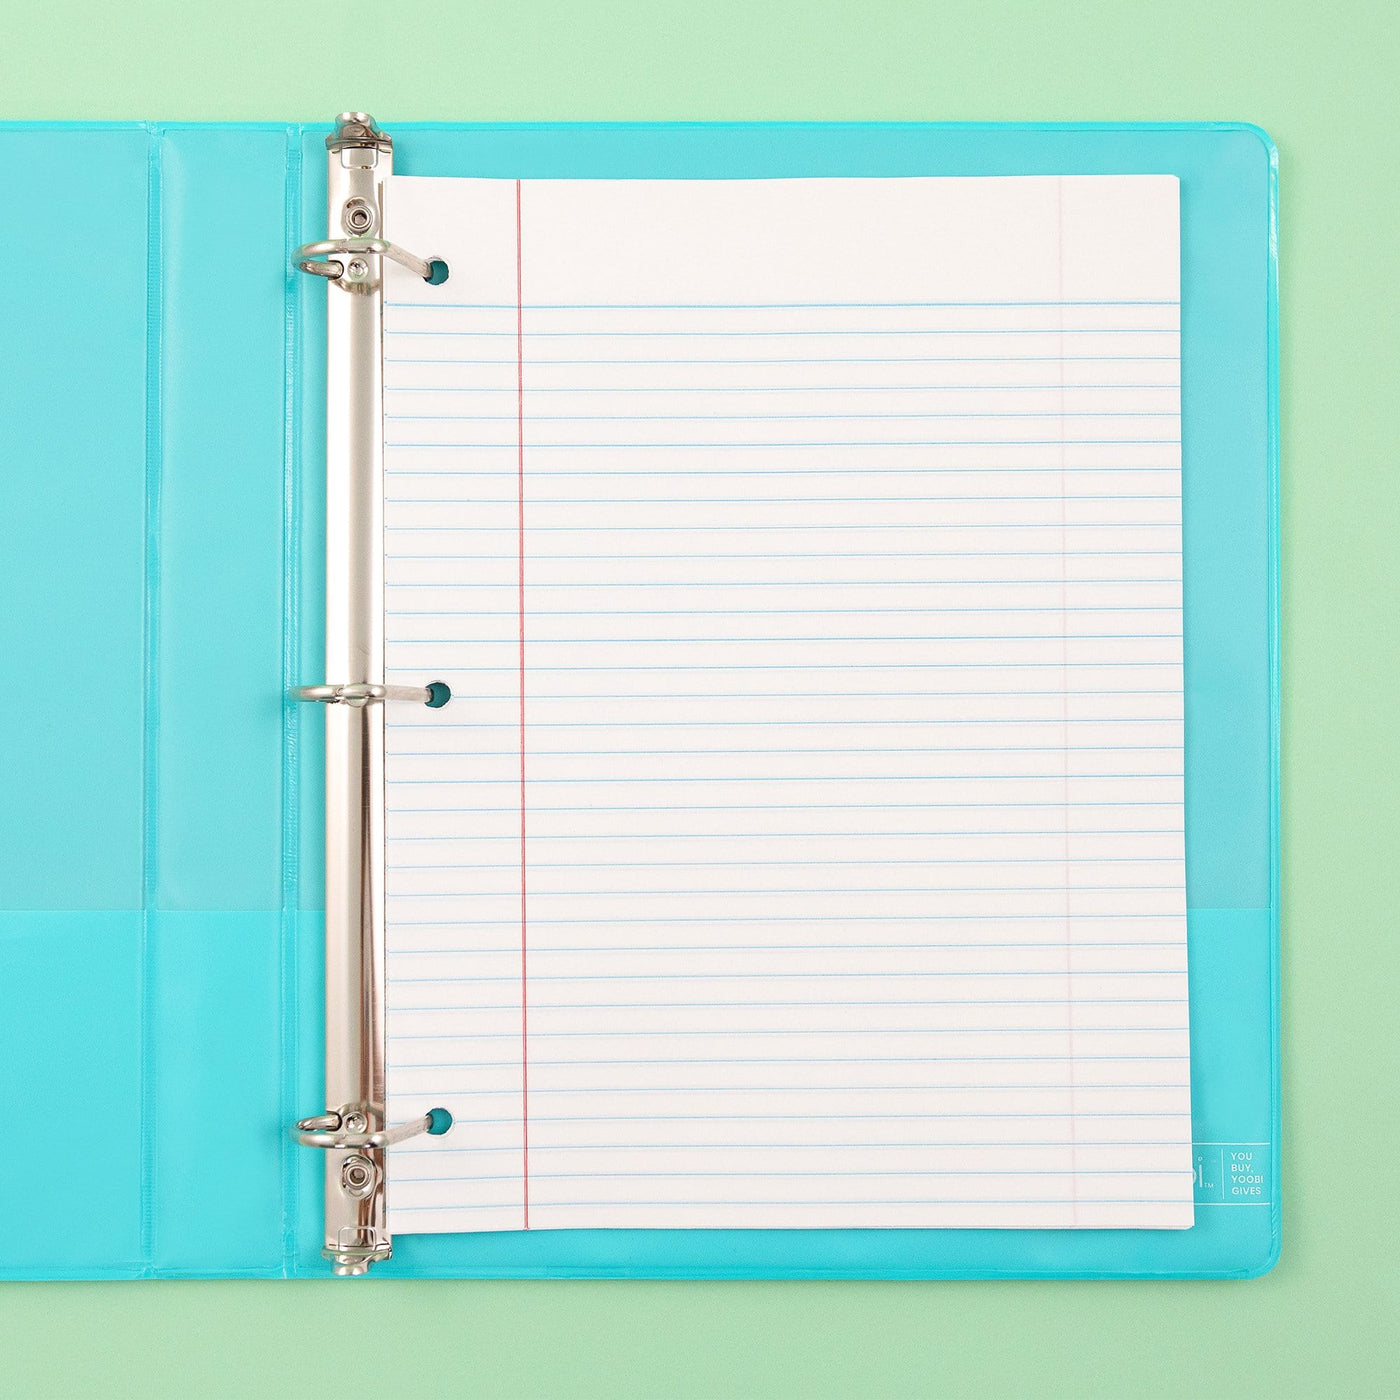 inside of open mint 3-ring binder showing inside pockets on both sides and 3-hole punched college-ruled paper inside binder